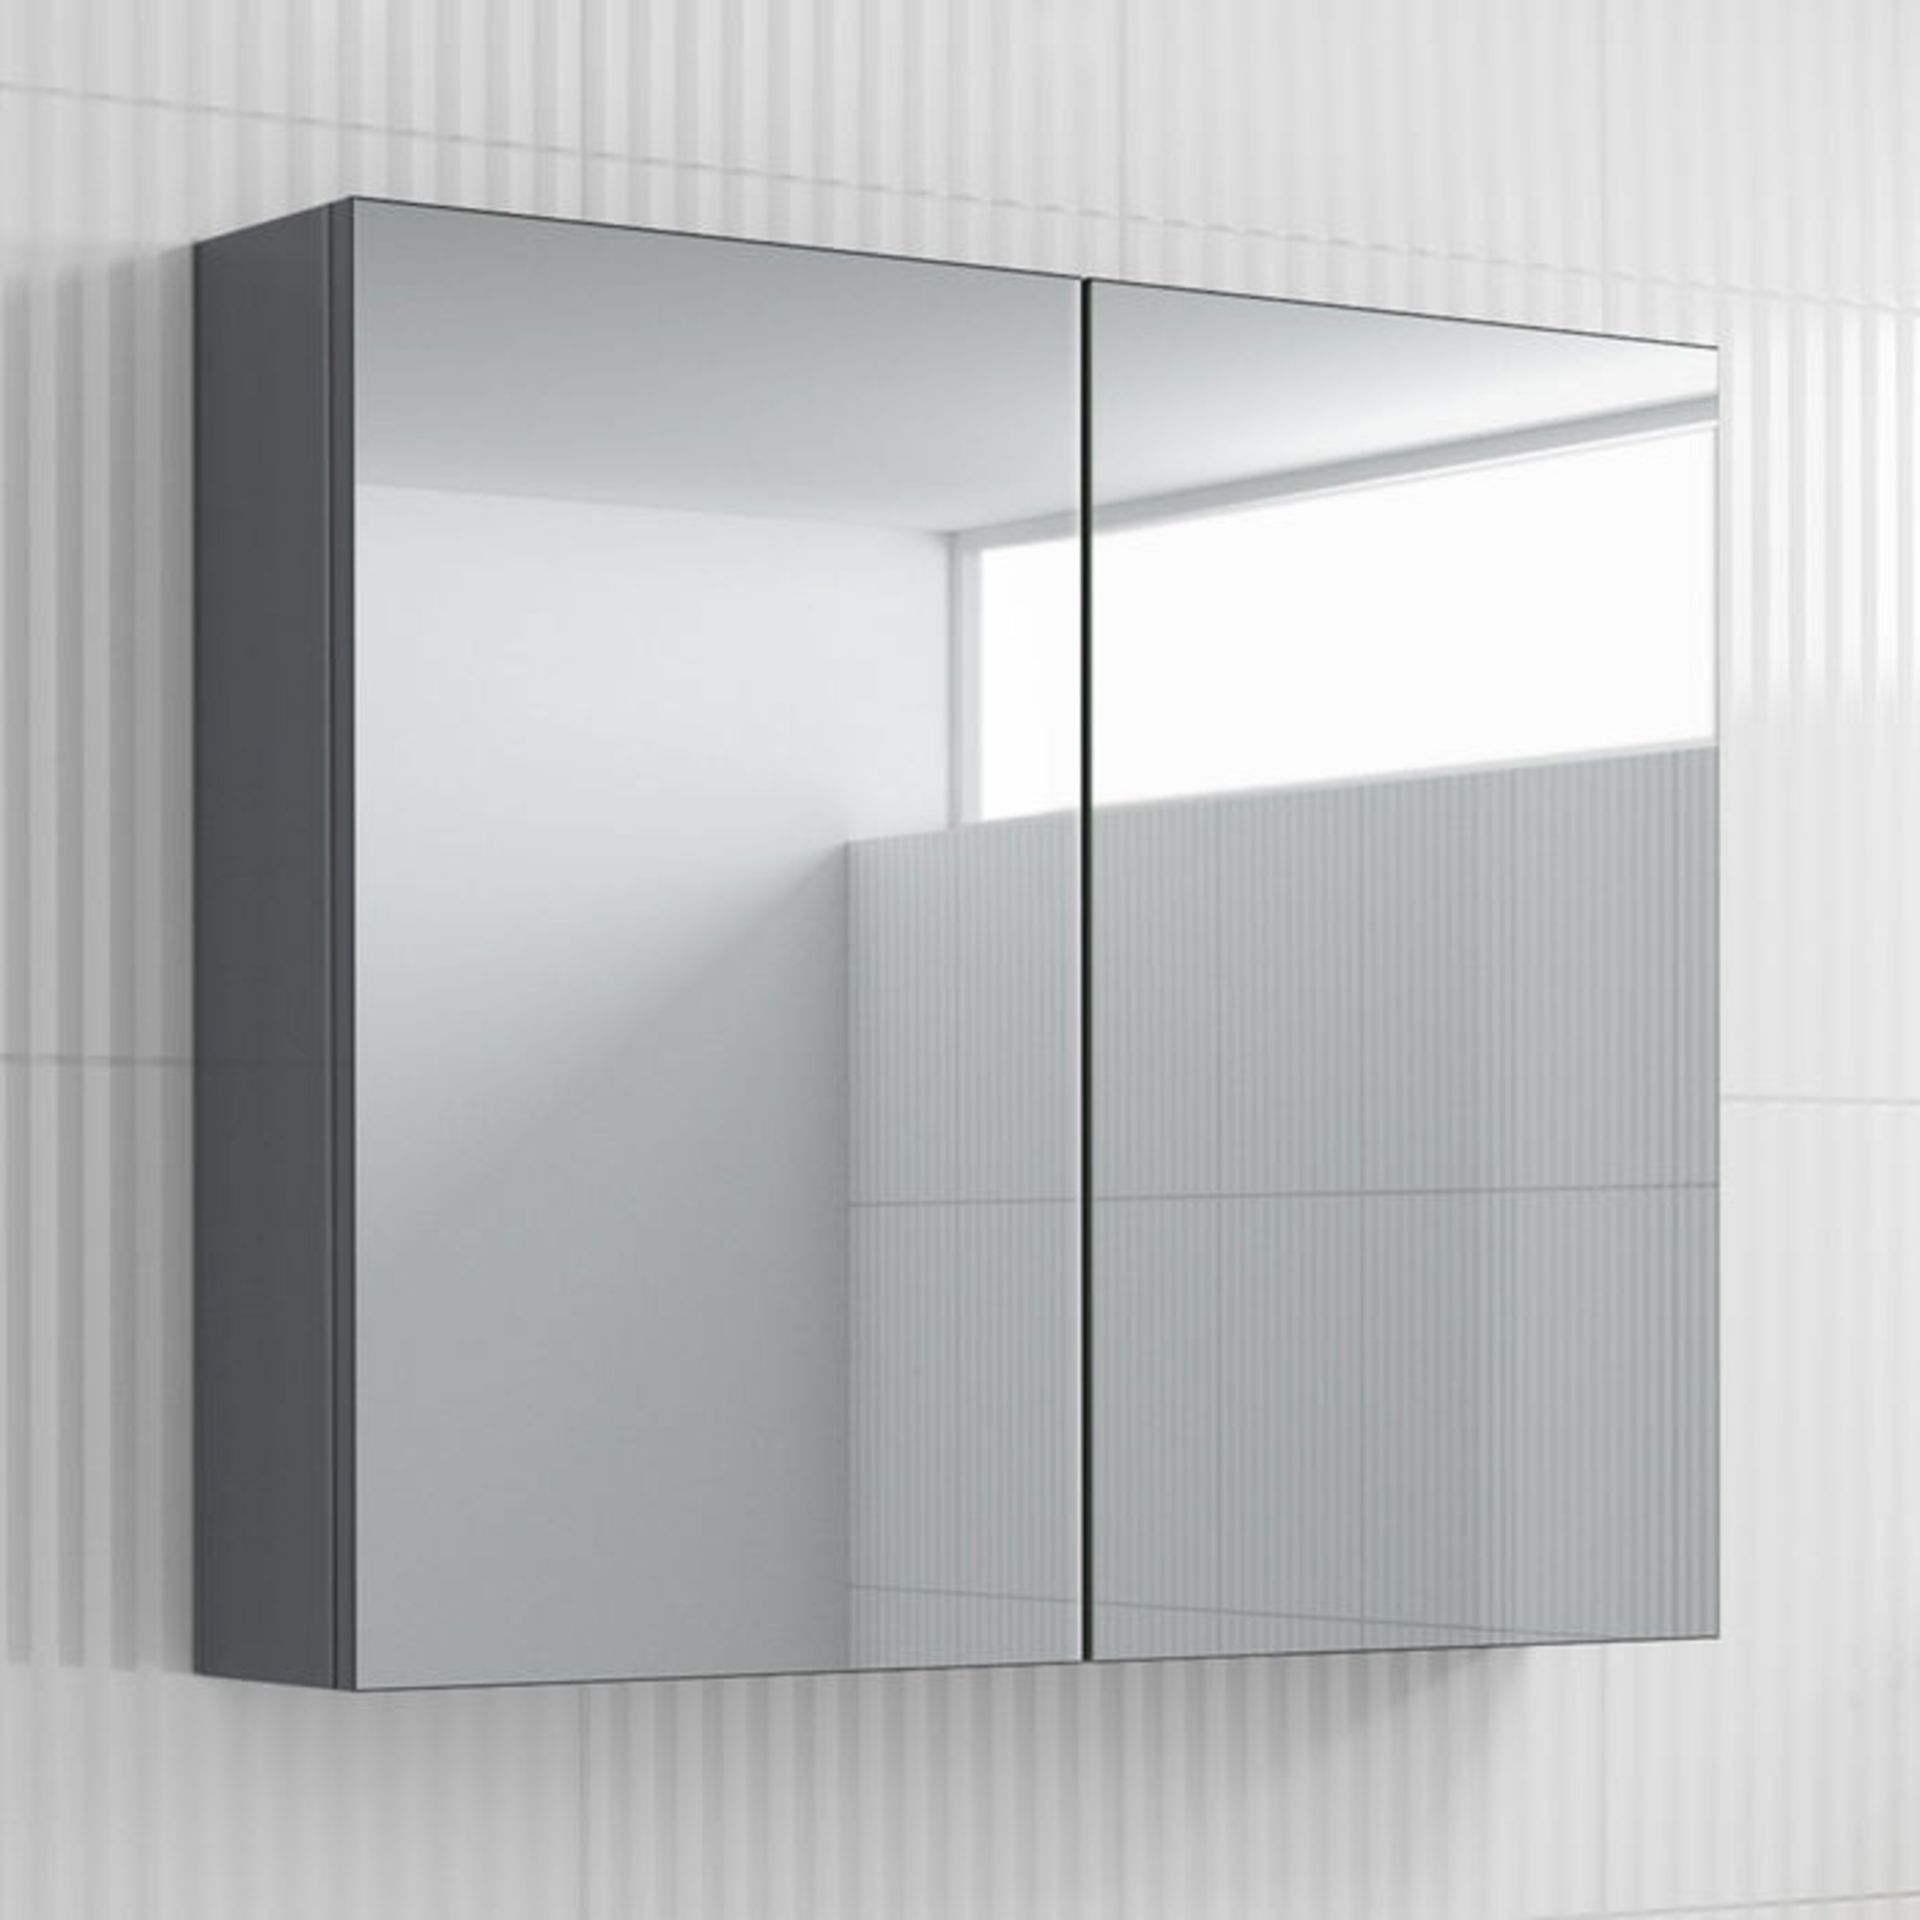 (XM91) 667mm Harper Gloss Grey Double Door Mirror Cabinet. RRP £299.99. Part of our Flat Pack - Image 2 of 4